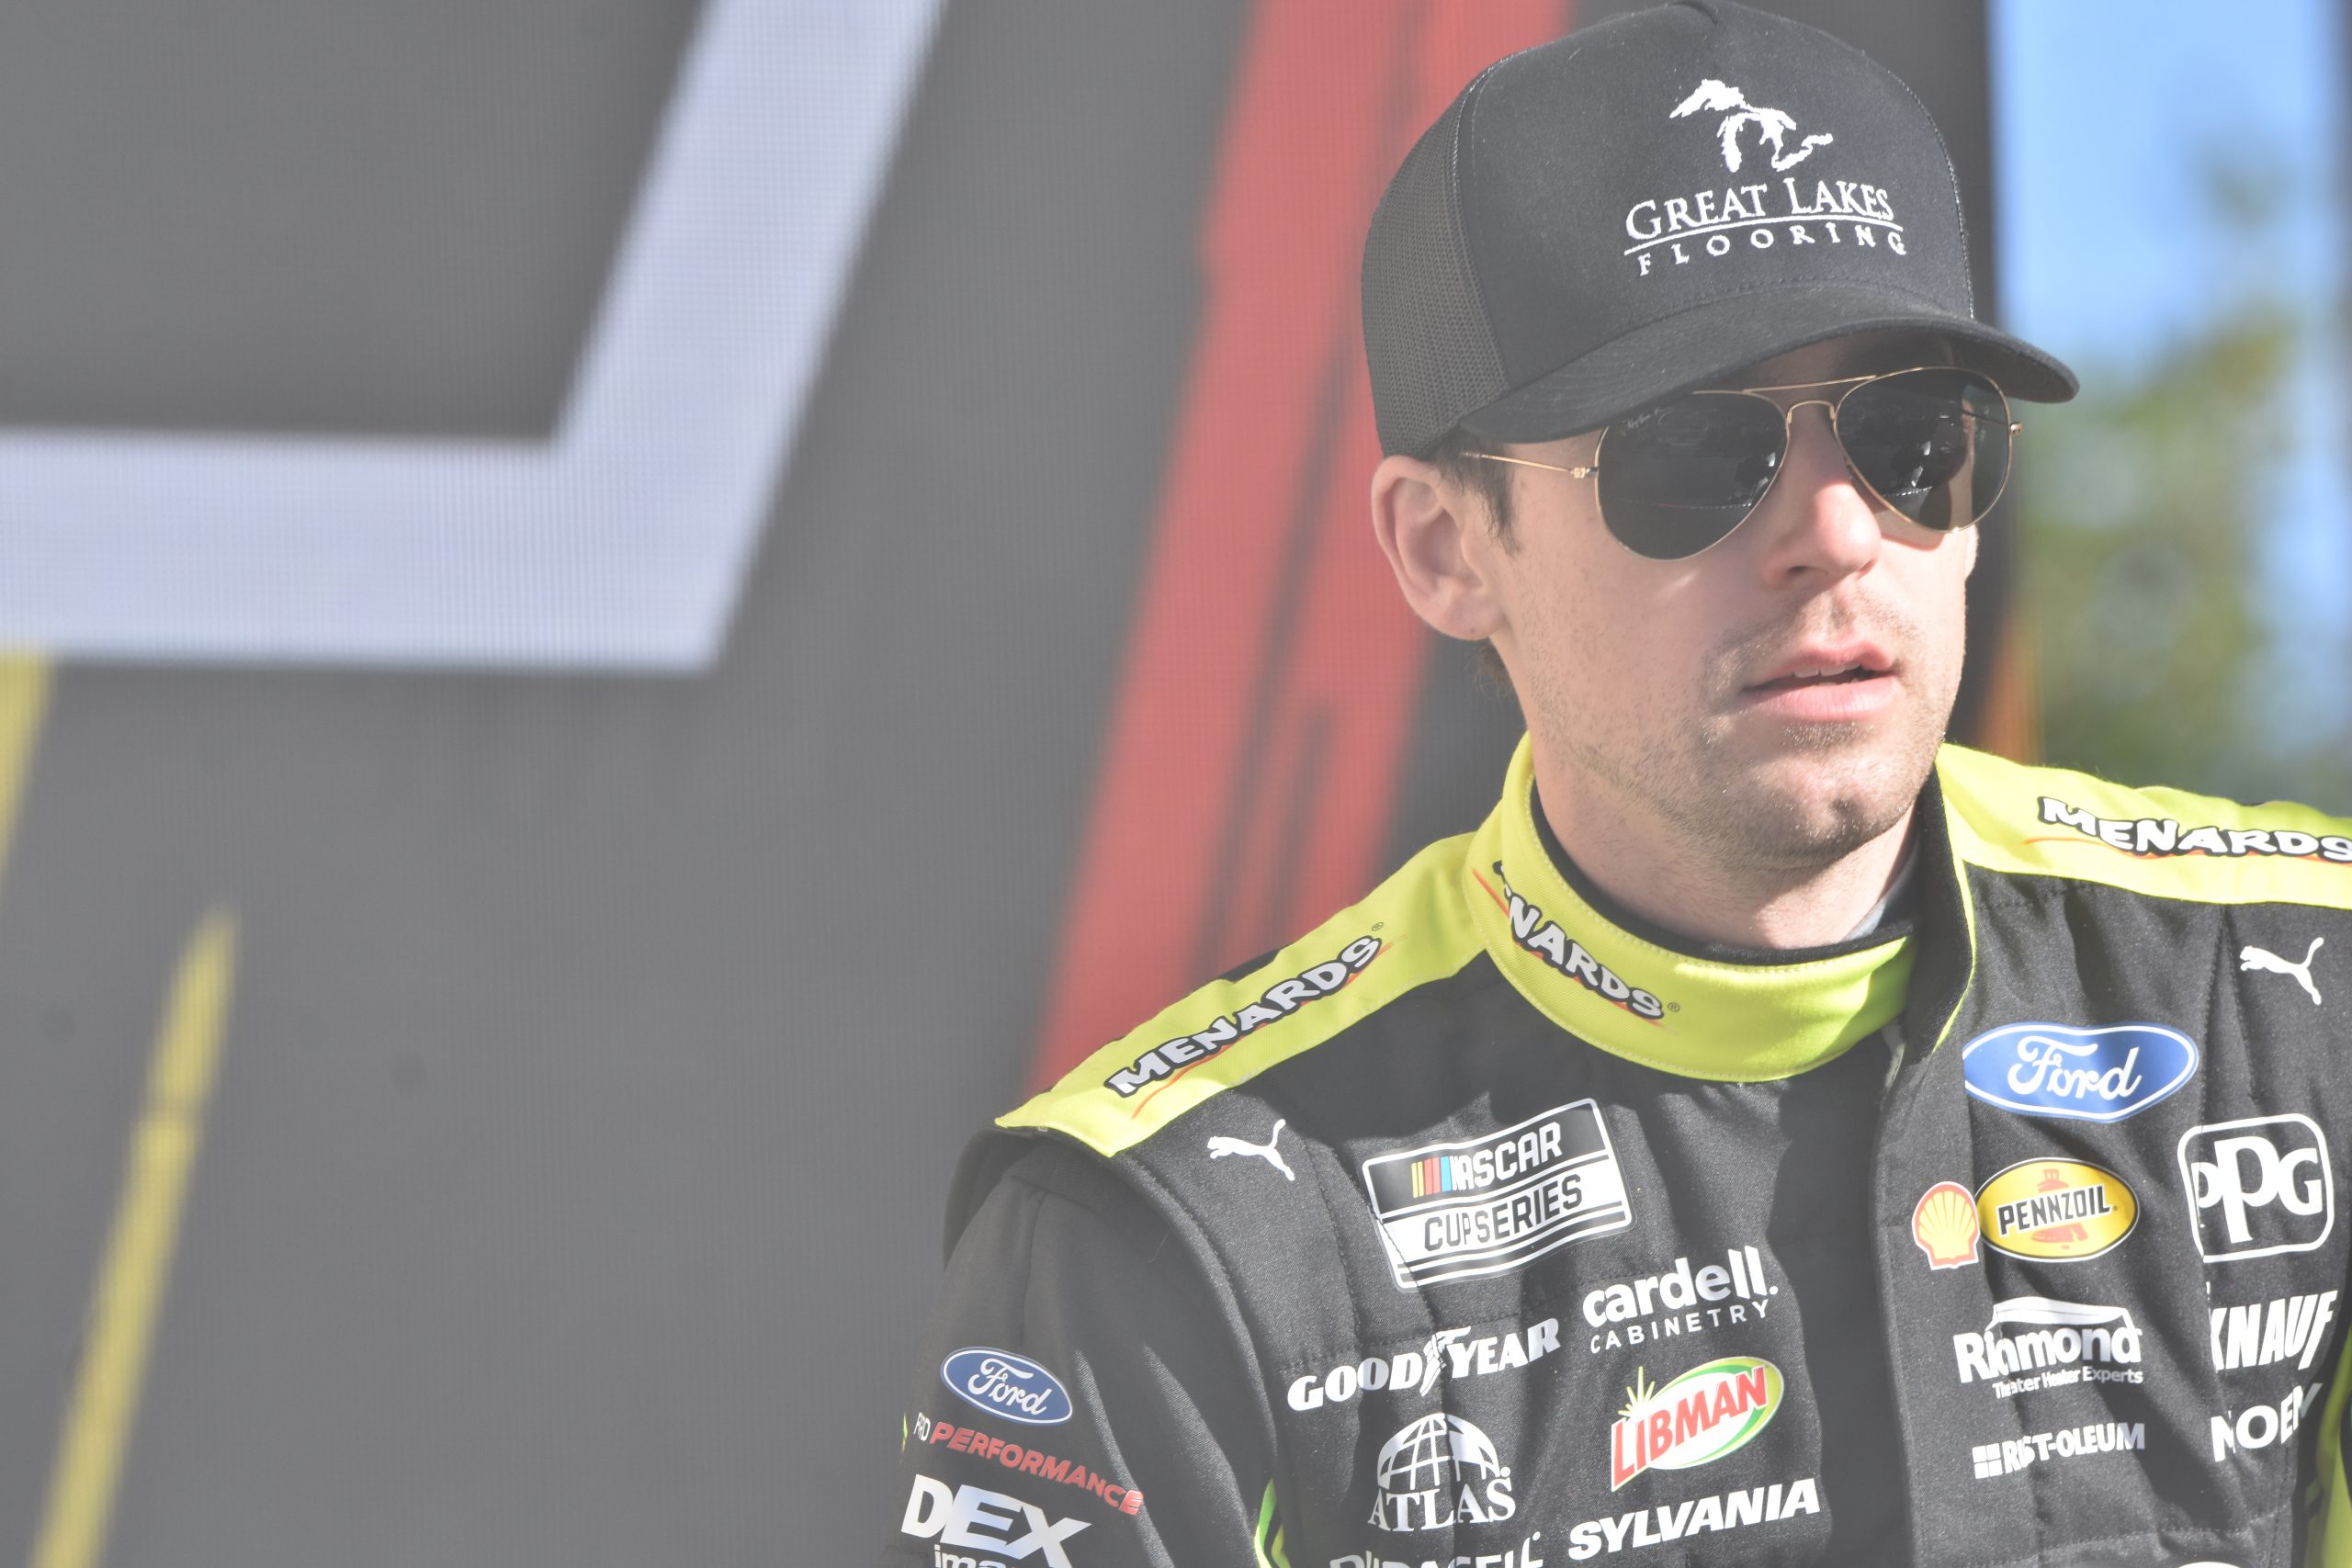 For a younger racer, Blaney's situational awareness likens to a seasoned veteran. (Photo: Luis Torres | The Podium Finish)